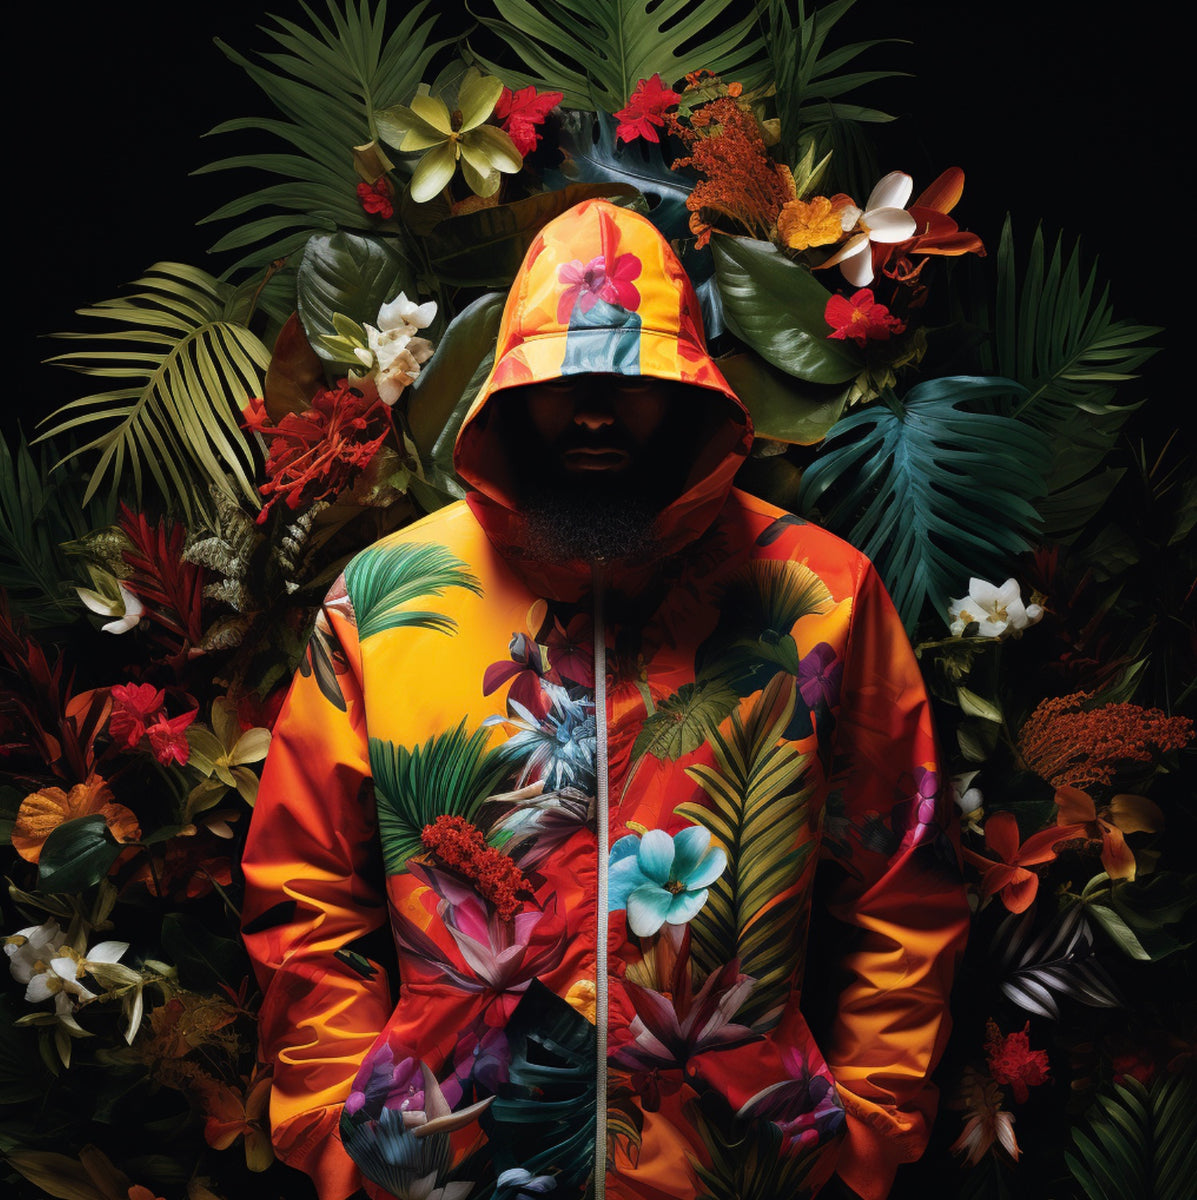 Luminous Rhapsody Jacket No. 1 - Vibrant floral print jacket on a model in front of a large tropical flower arrangement.